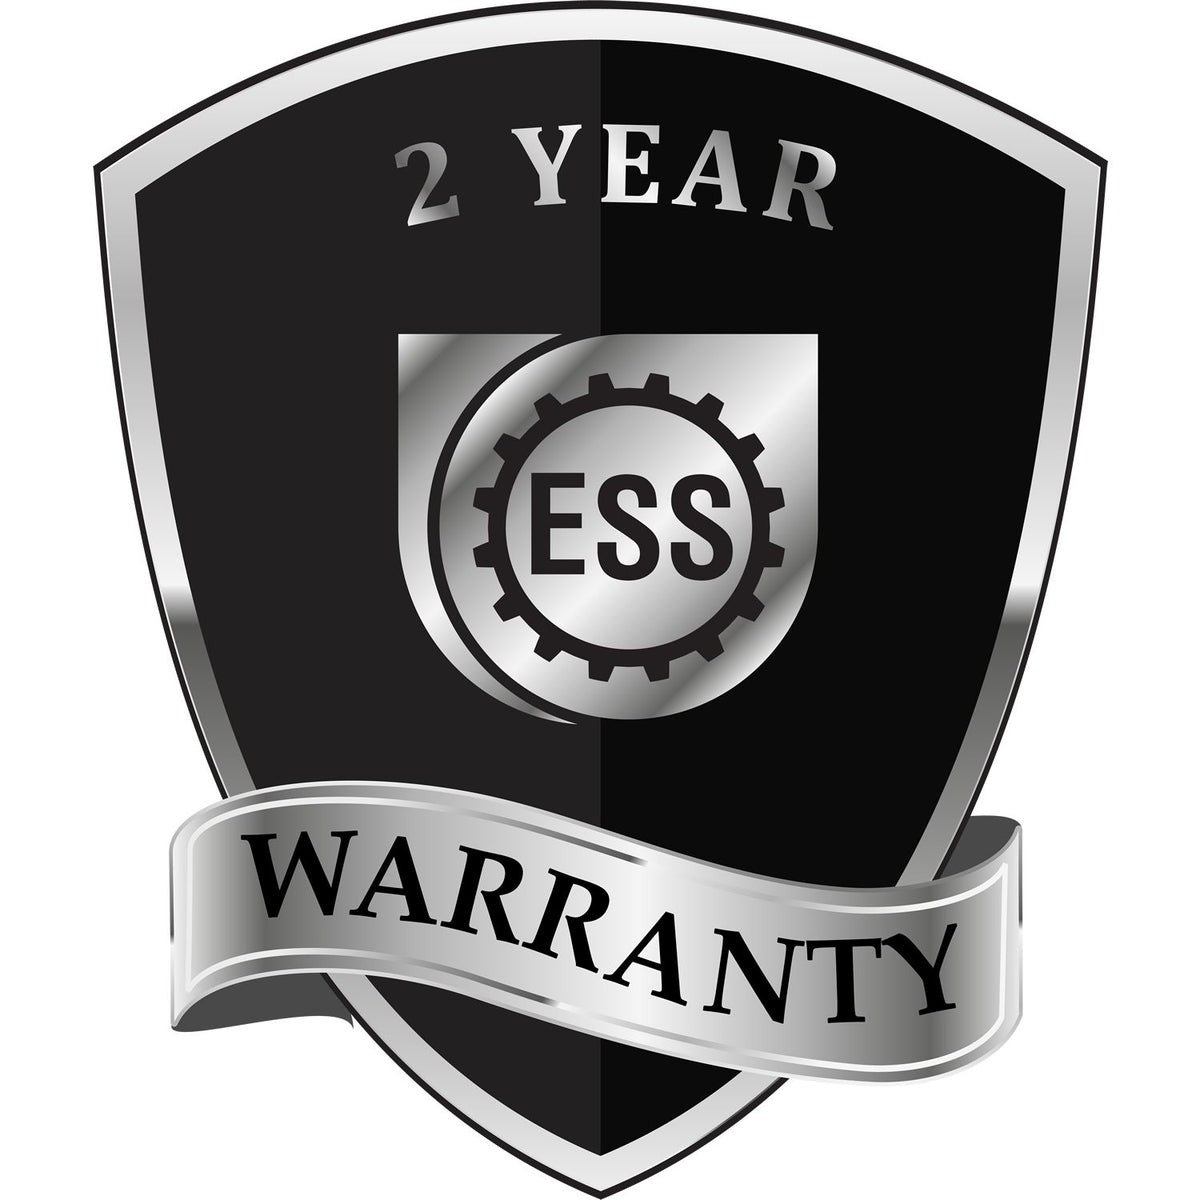 A badge or emblem showing a warranty icon for the State of Texas Long Reach Architectural Embossing Seal